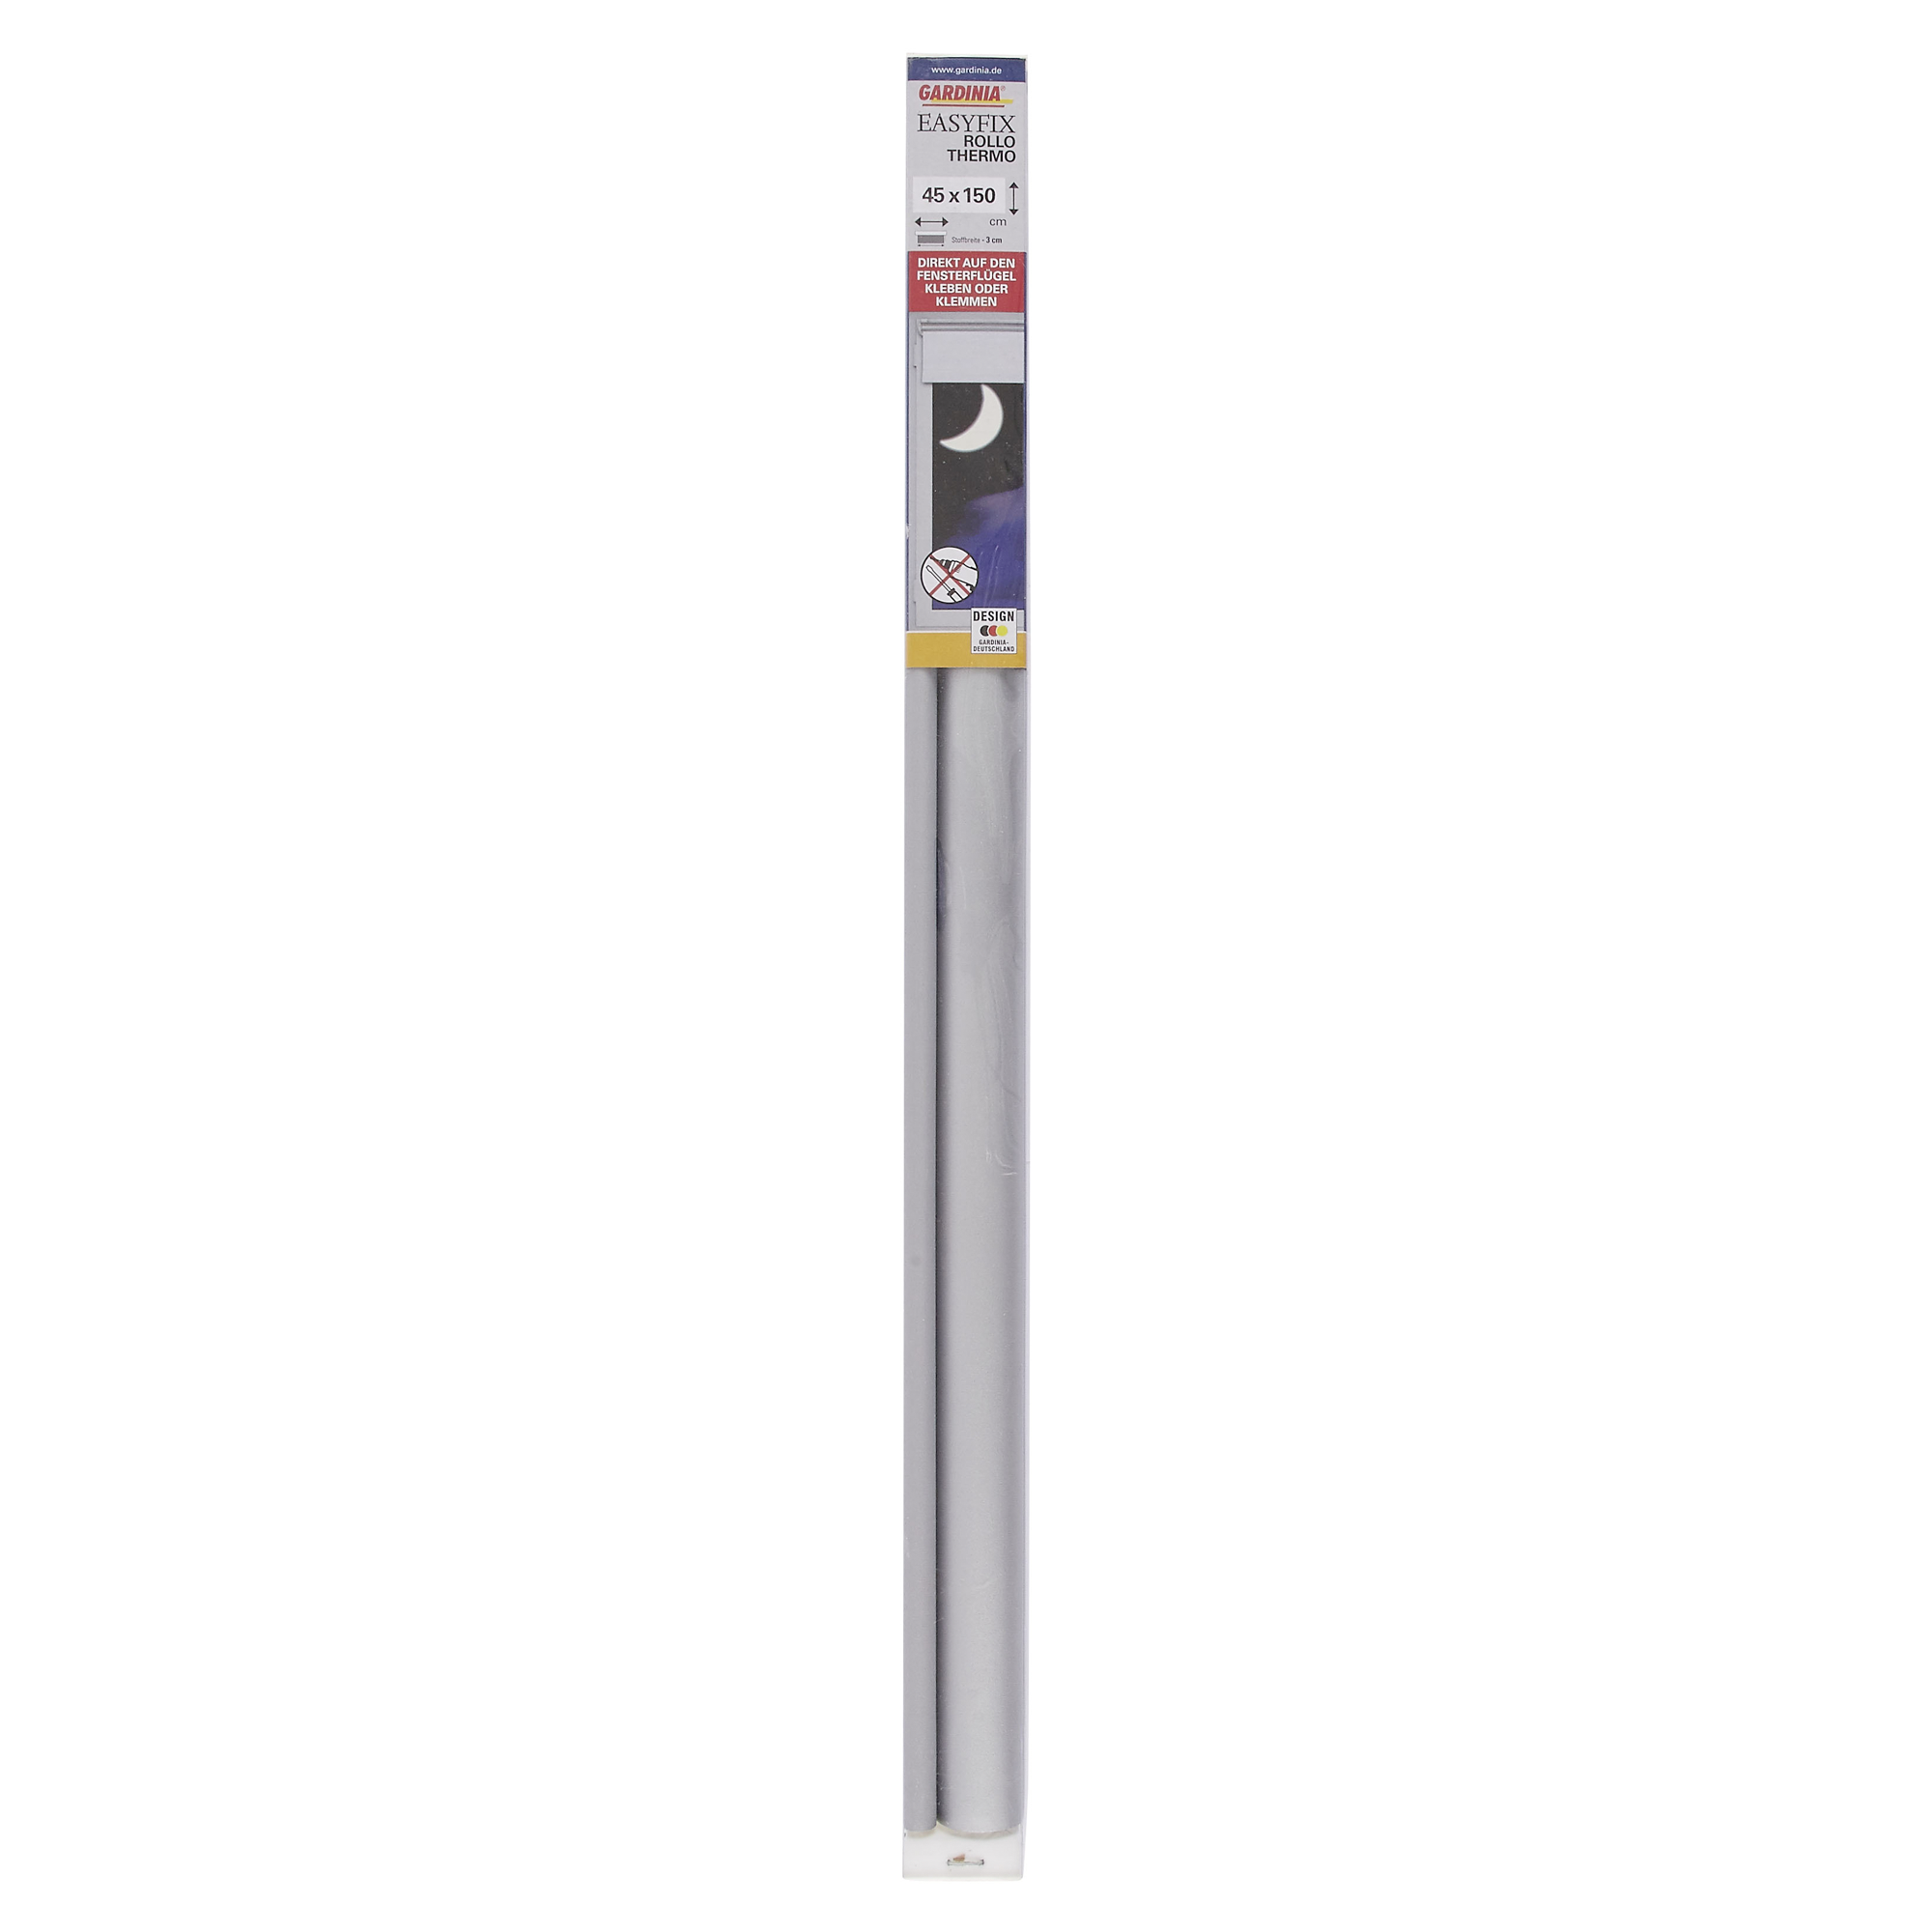 EasyFix Rollo 'Thermo energiesparend' grau 75 x 150 cm + product picture